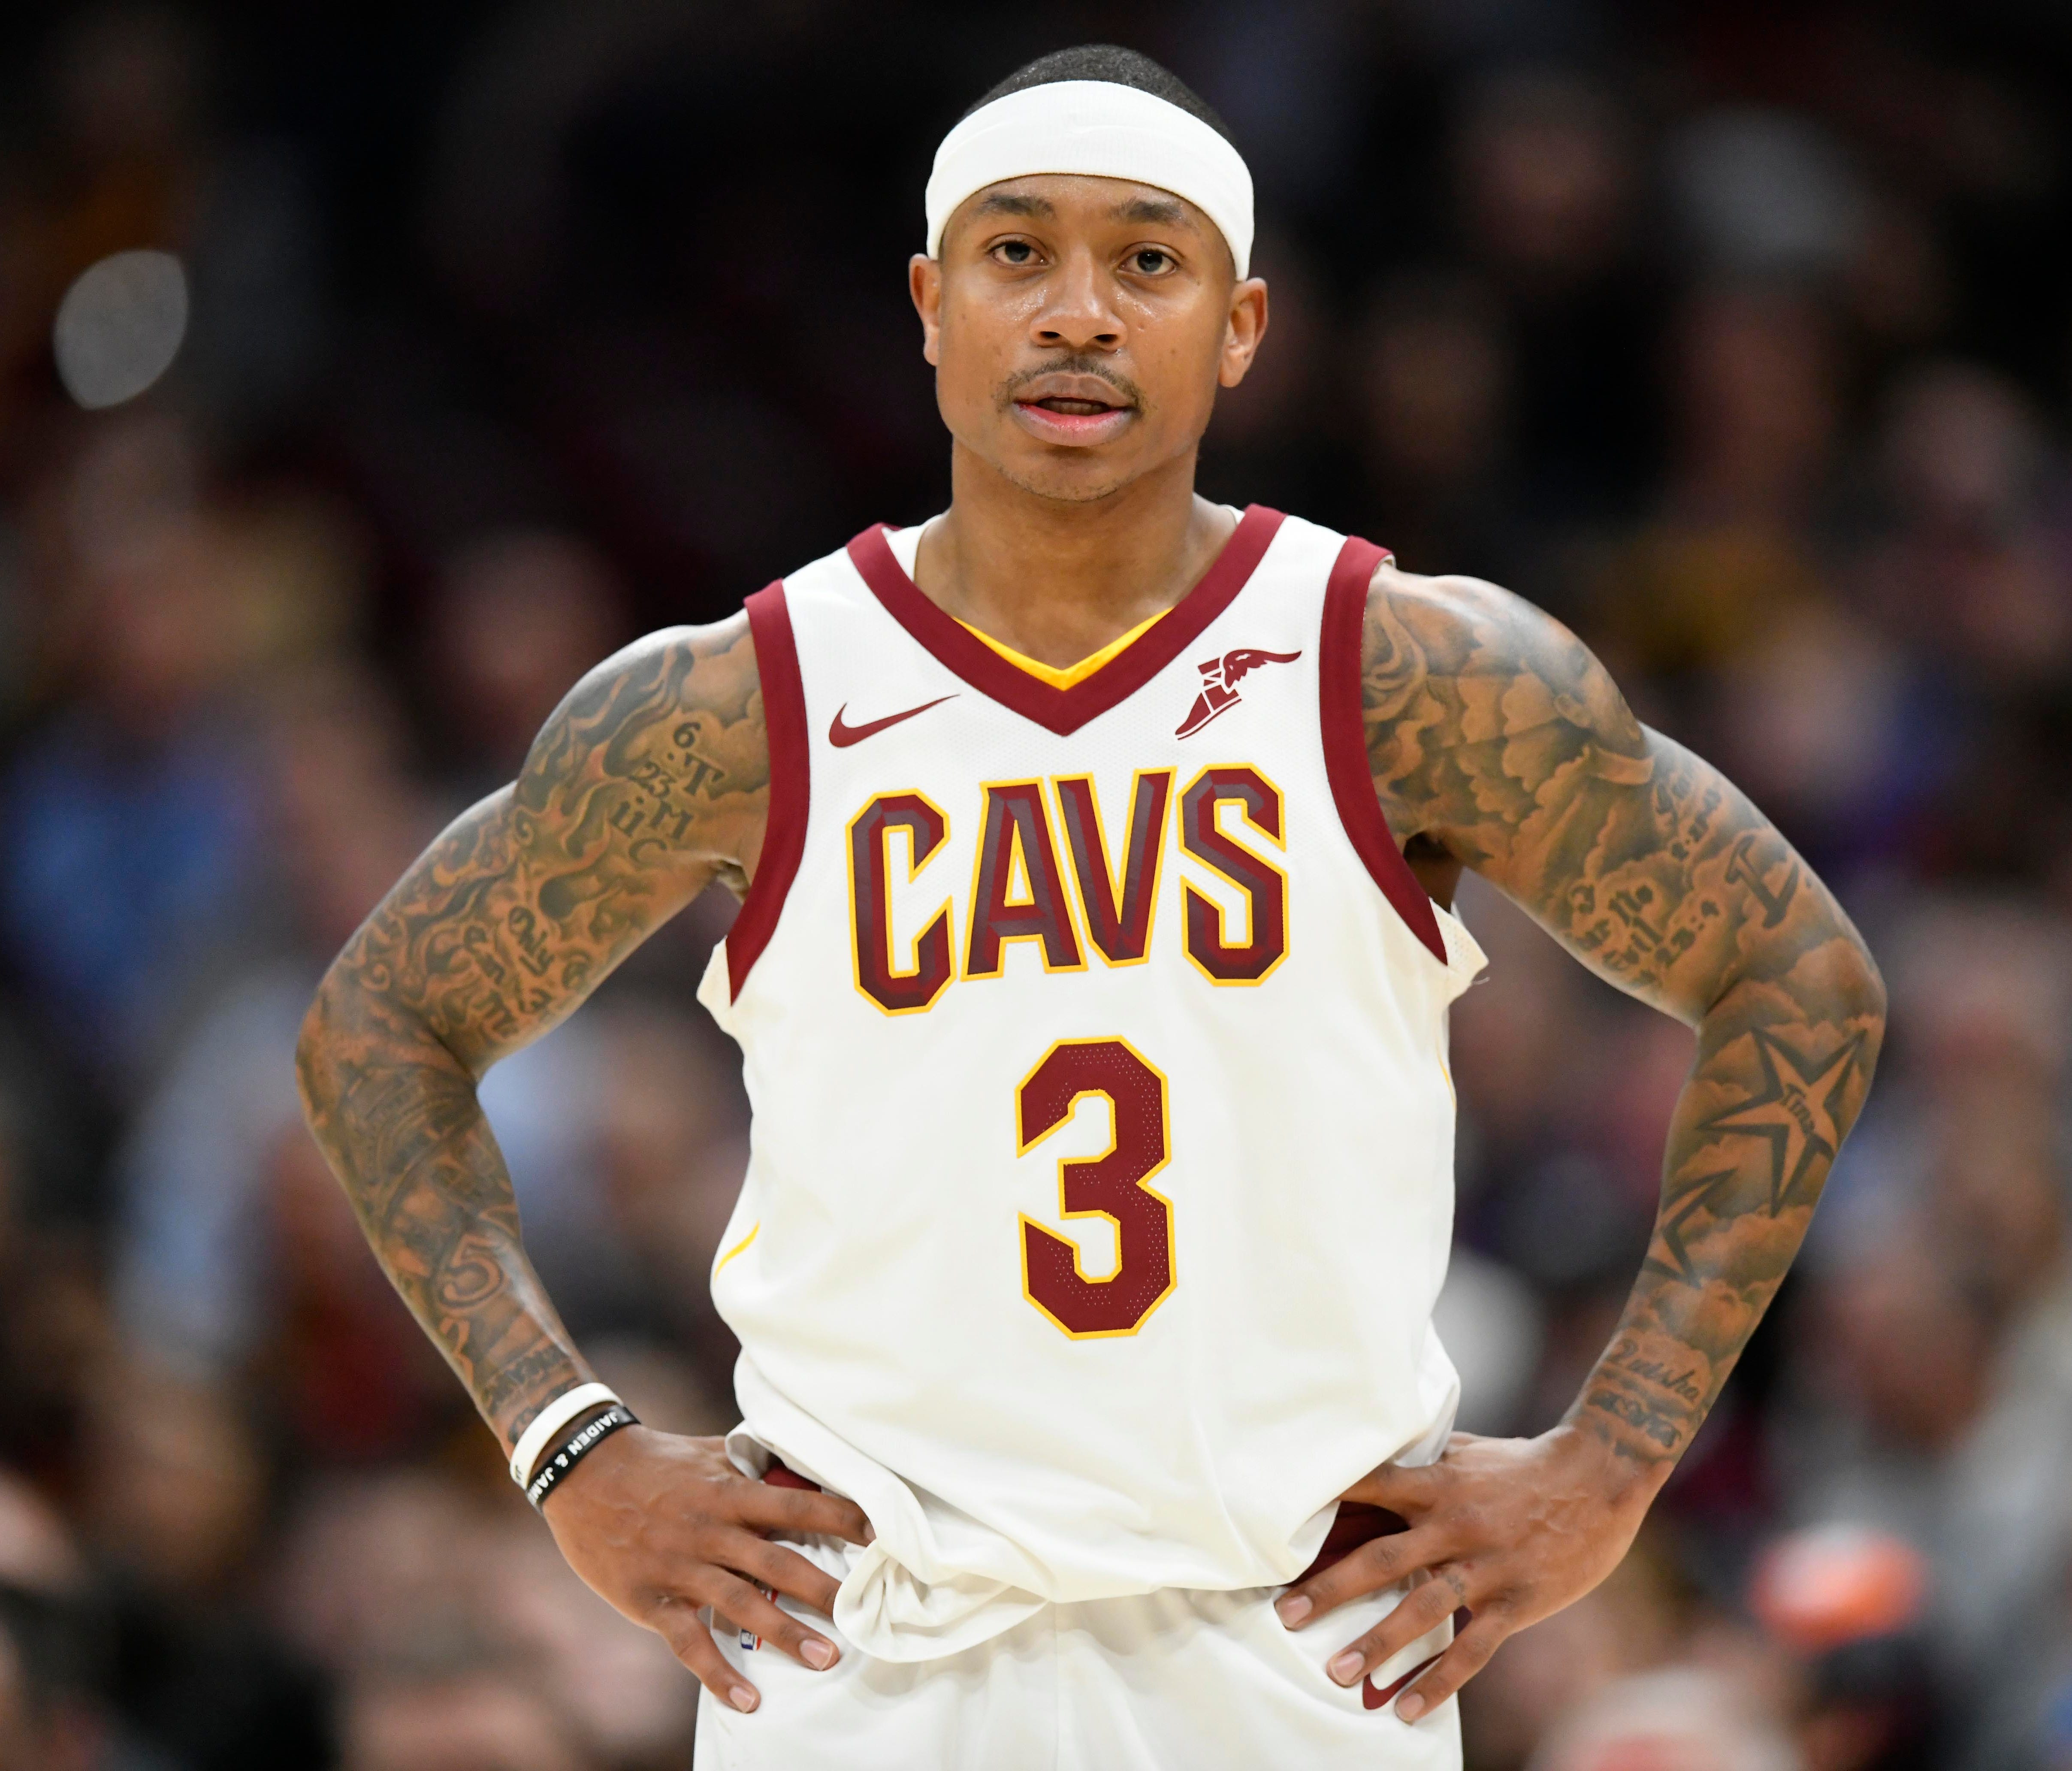 Cleveland Cavaliers guard Isaiah Thomas (3) reacts in the second quarter against the Miami Heat at Quicken Loans Arena.